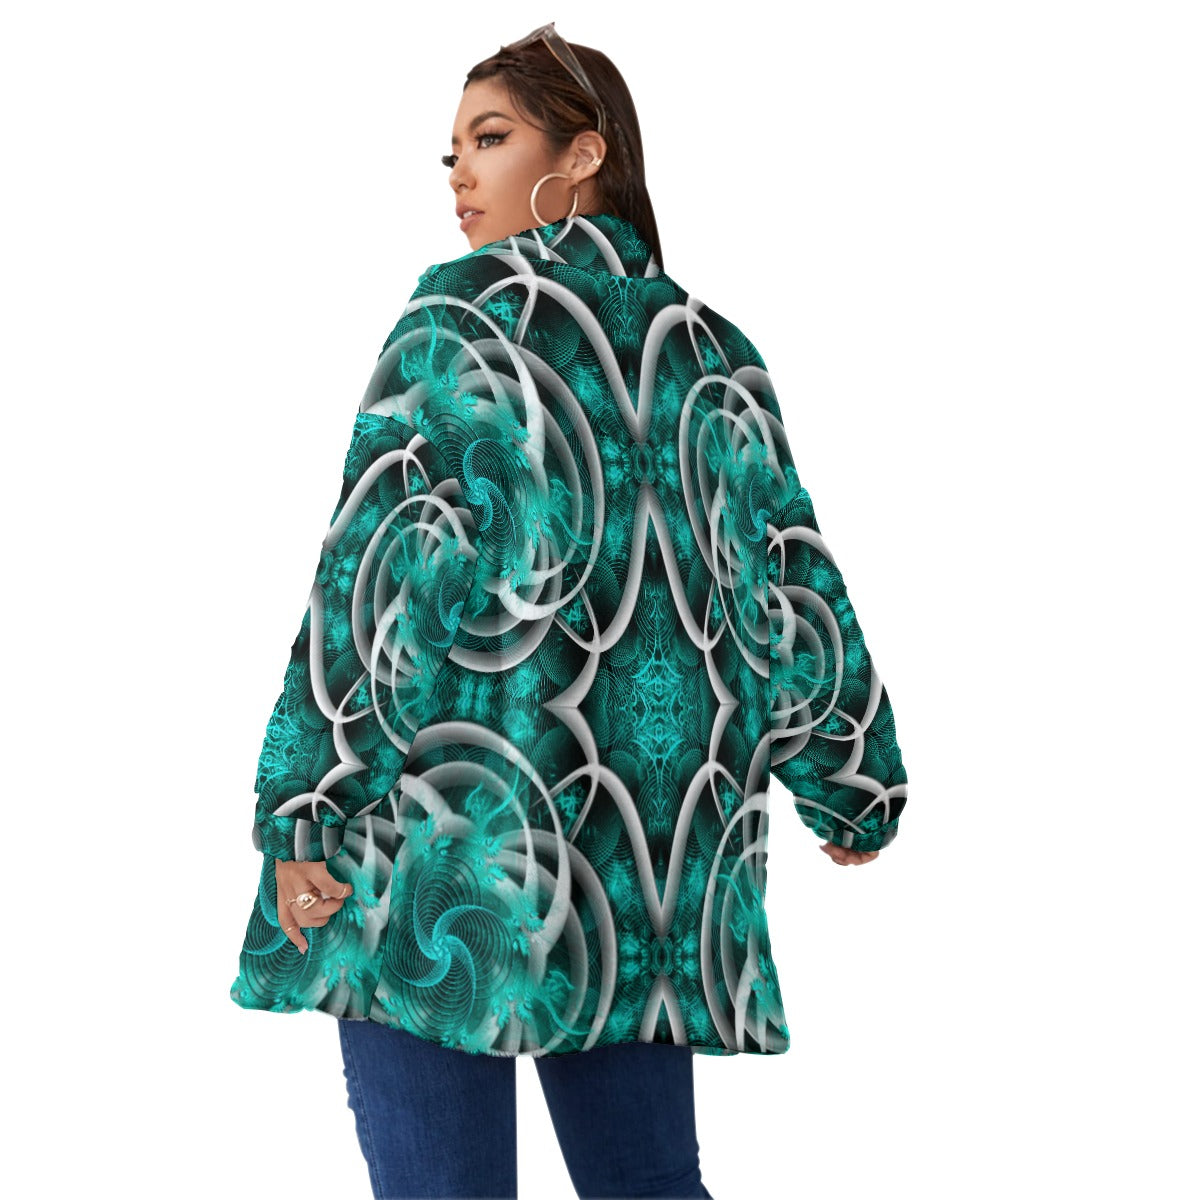 Warmth Redefined: Unisex Borg Fleece Plus Size Coat with Stand-up Collar